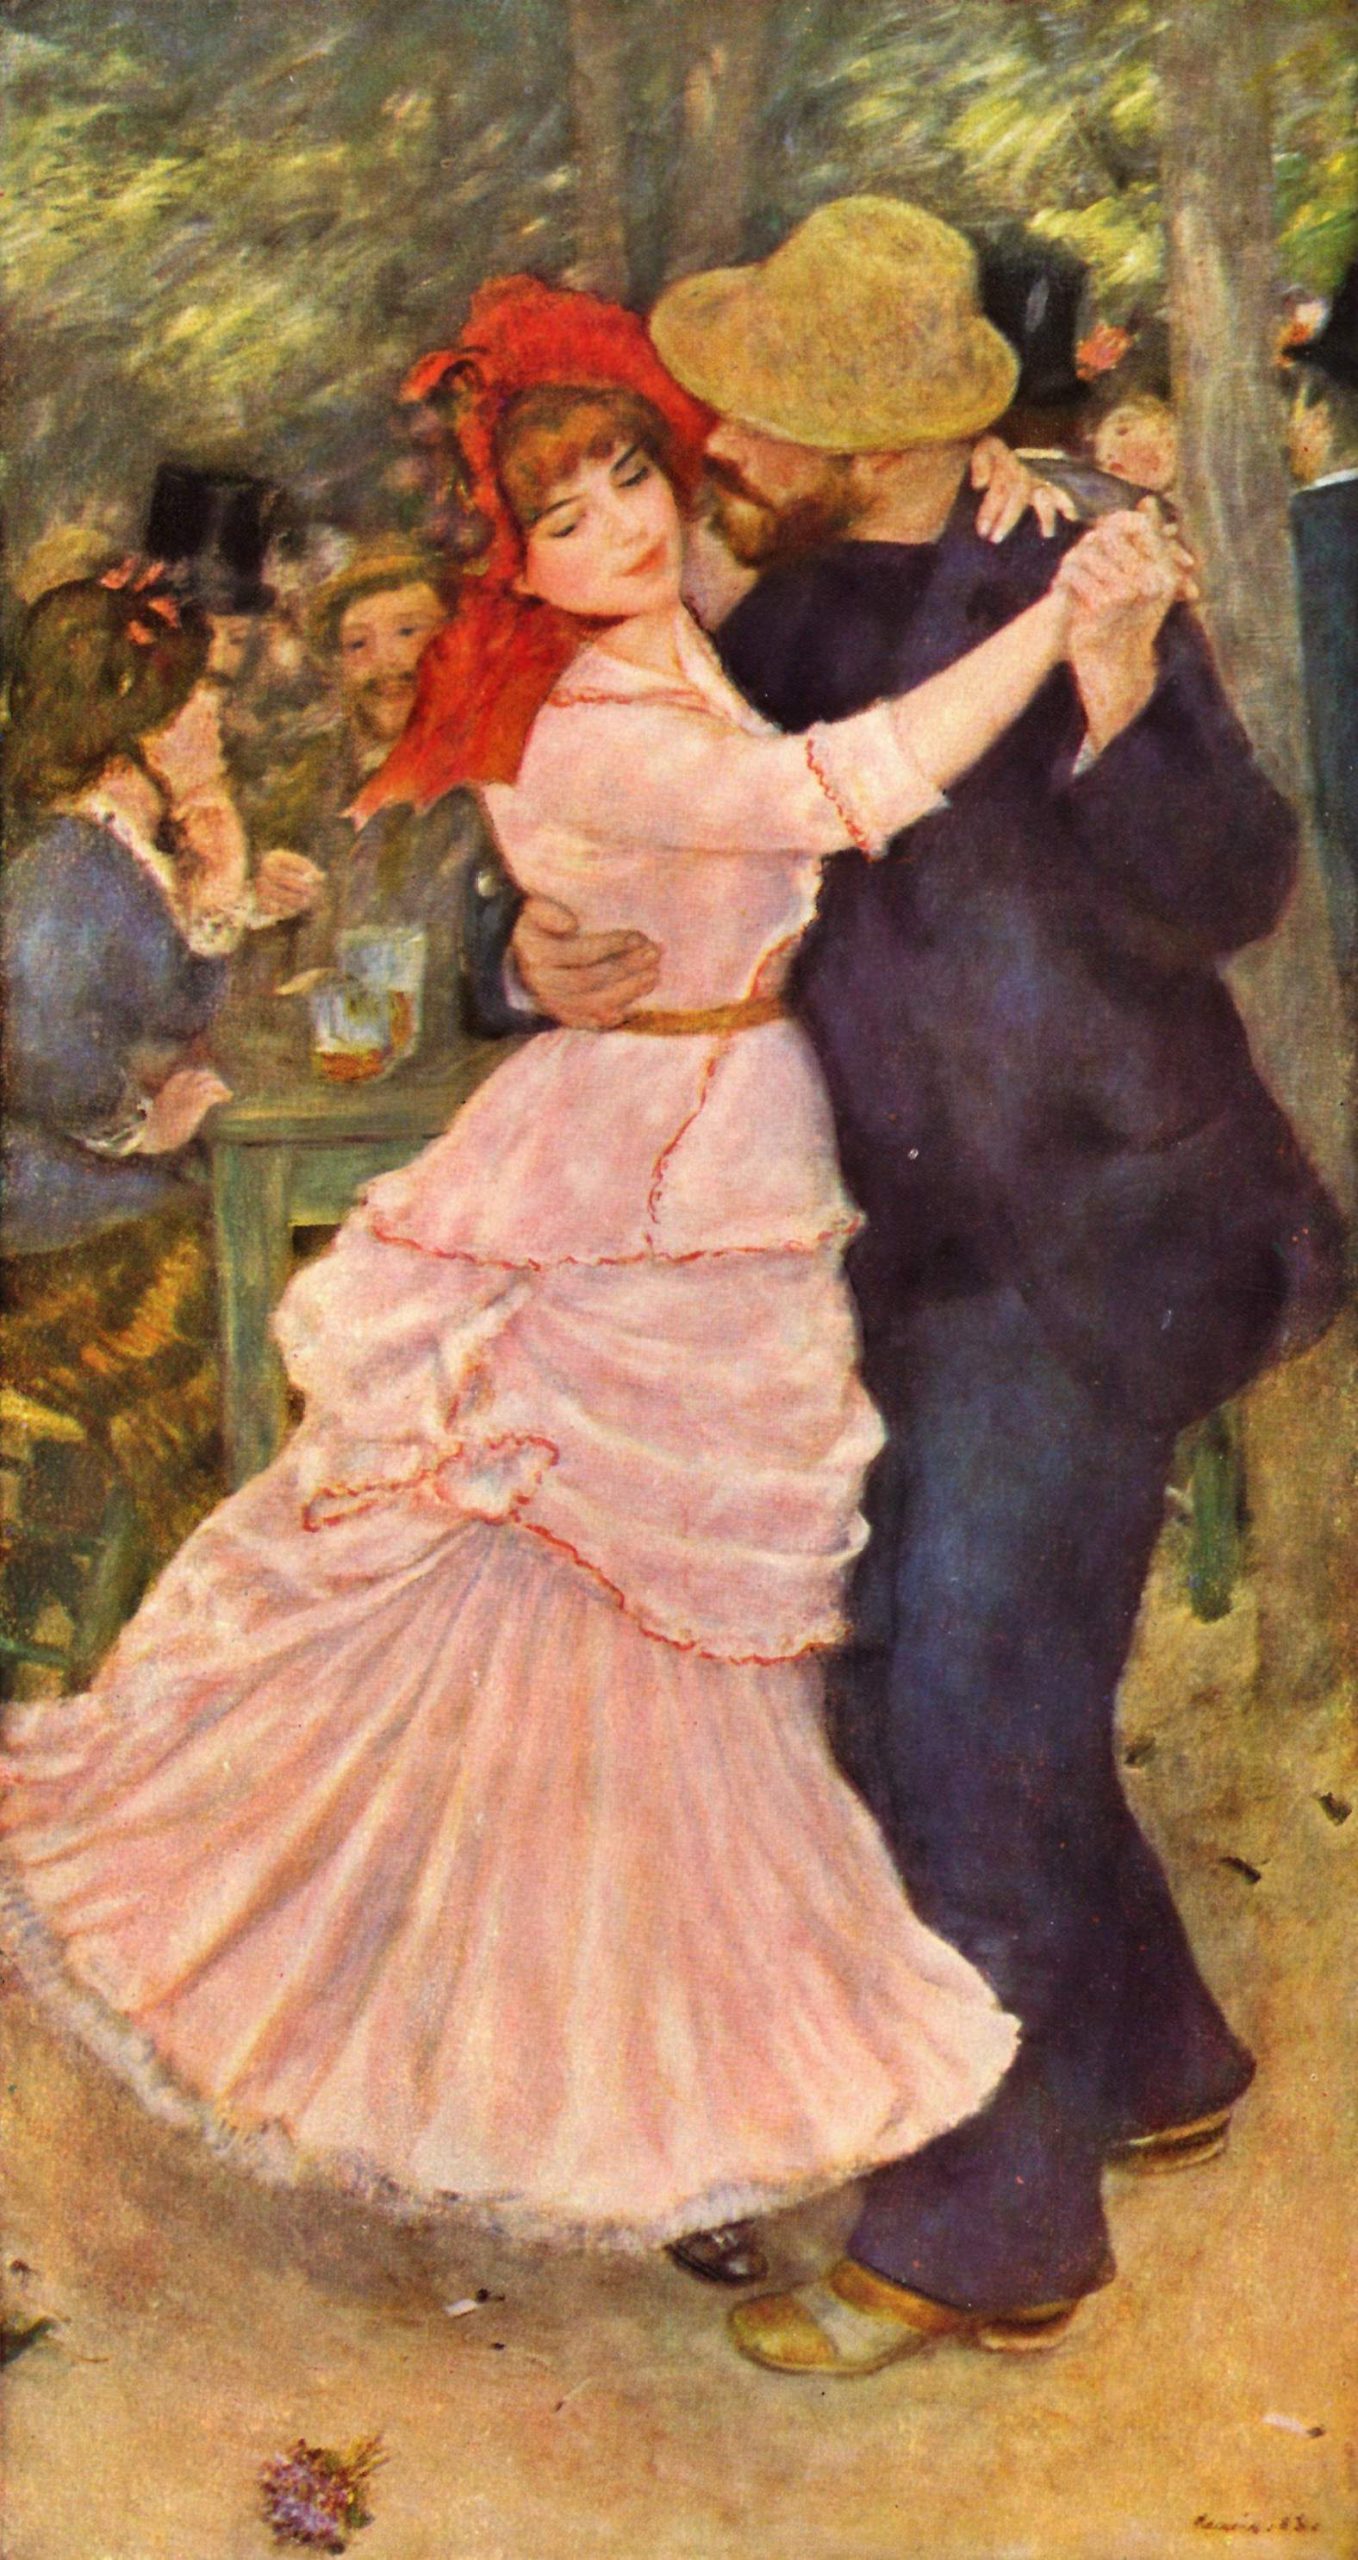 A woman and a man dancing hand-in-hand at a gathering outdoors